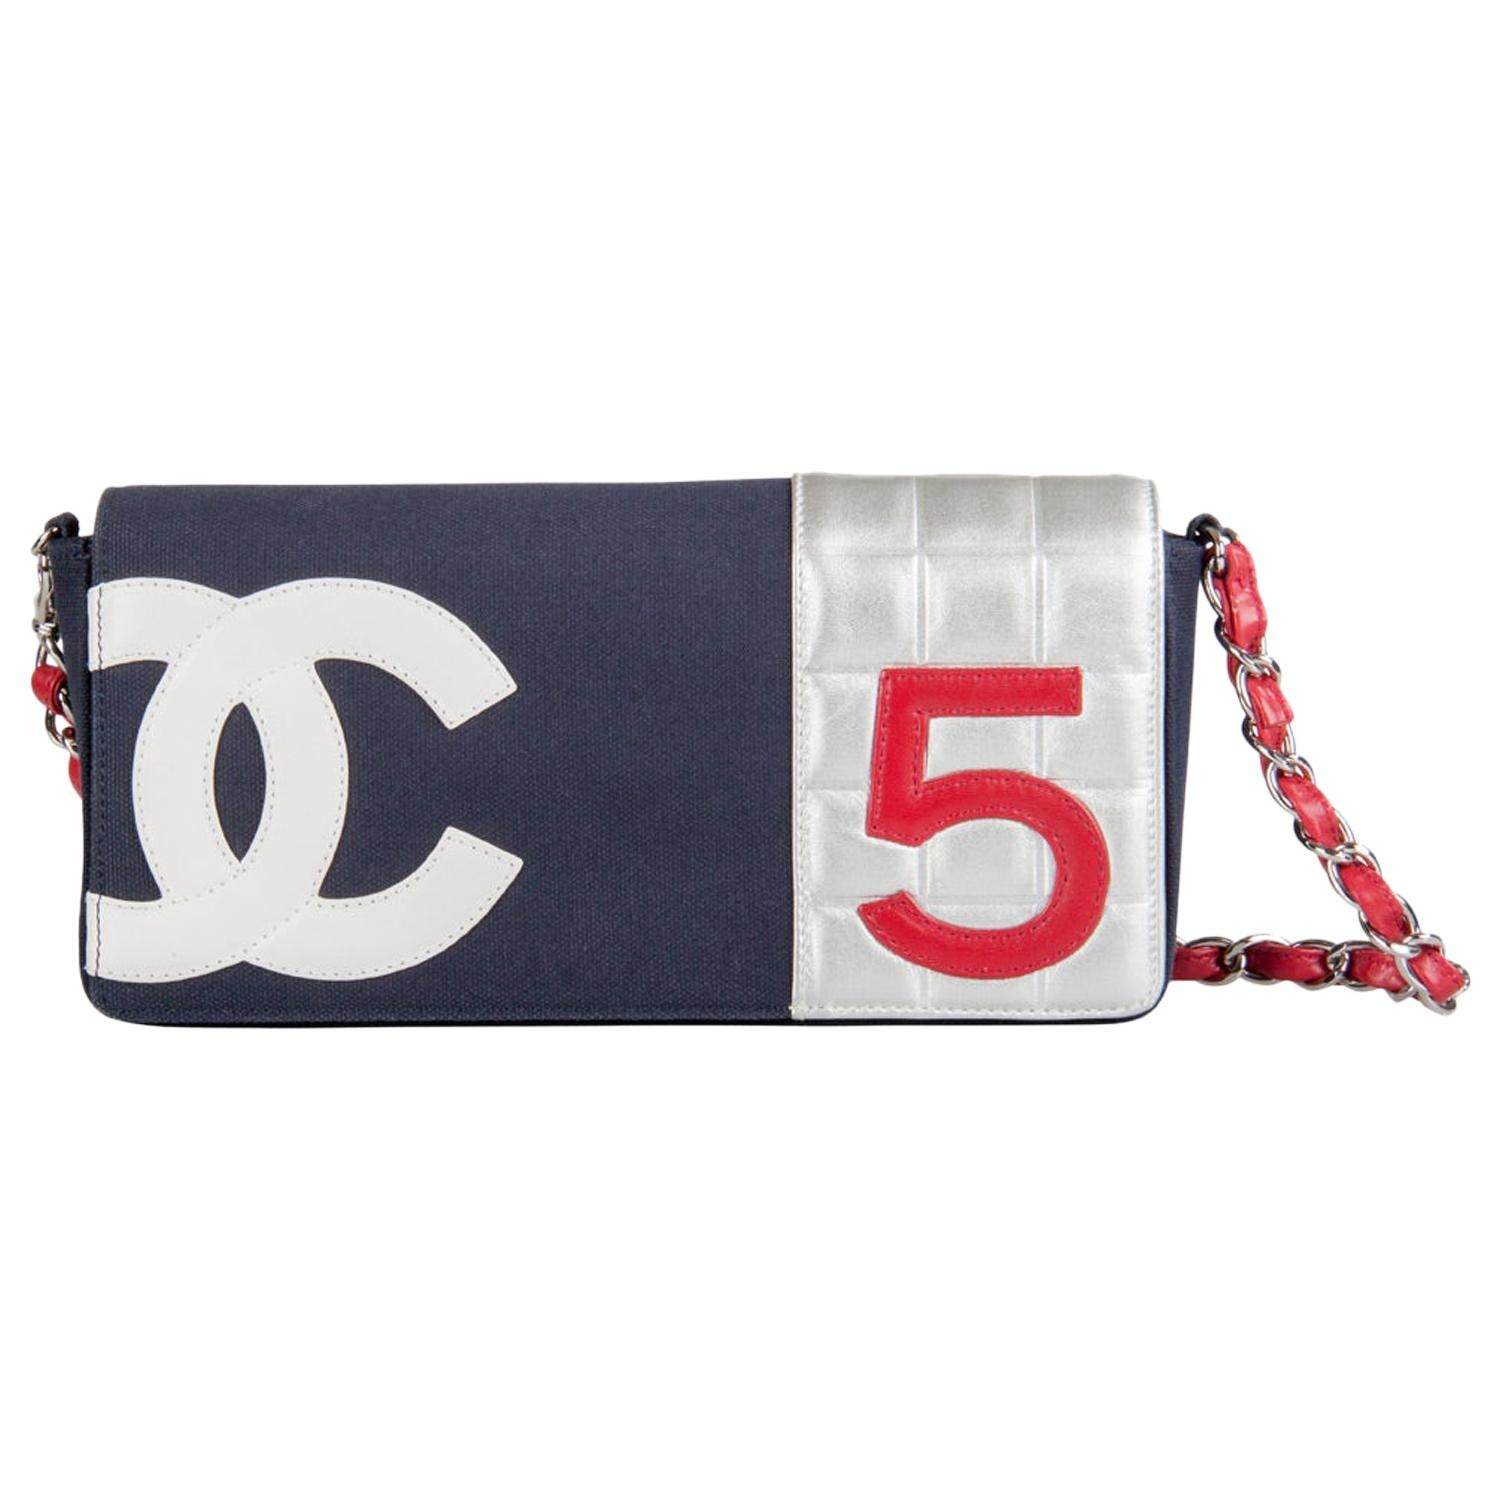 Chanel Multicolor Canvas and Leather No. 5 Flap Bag